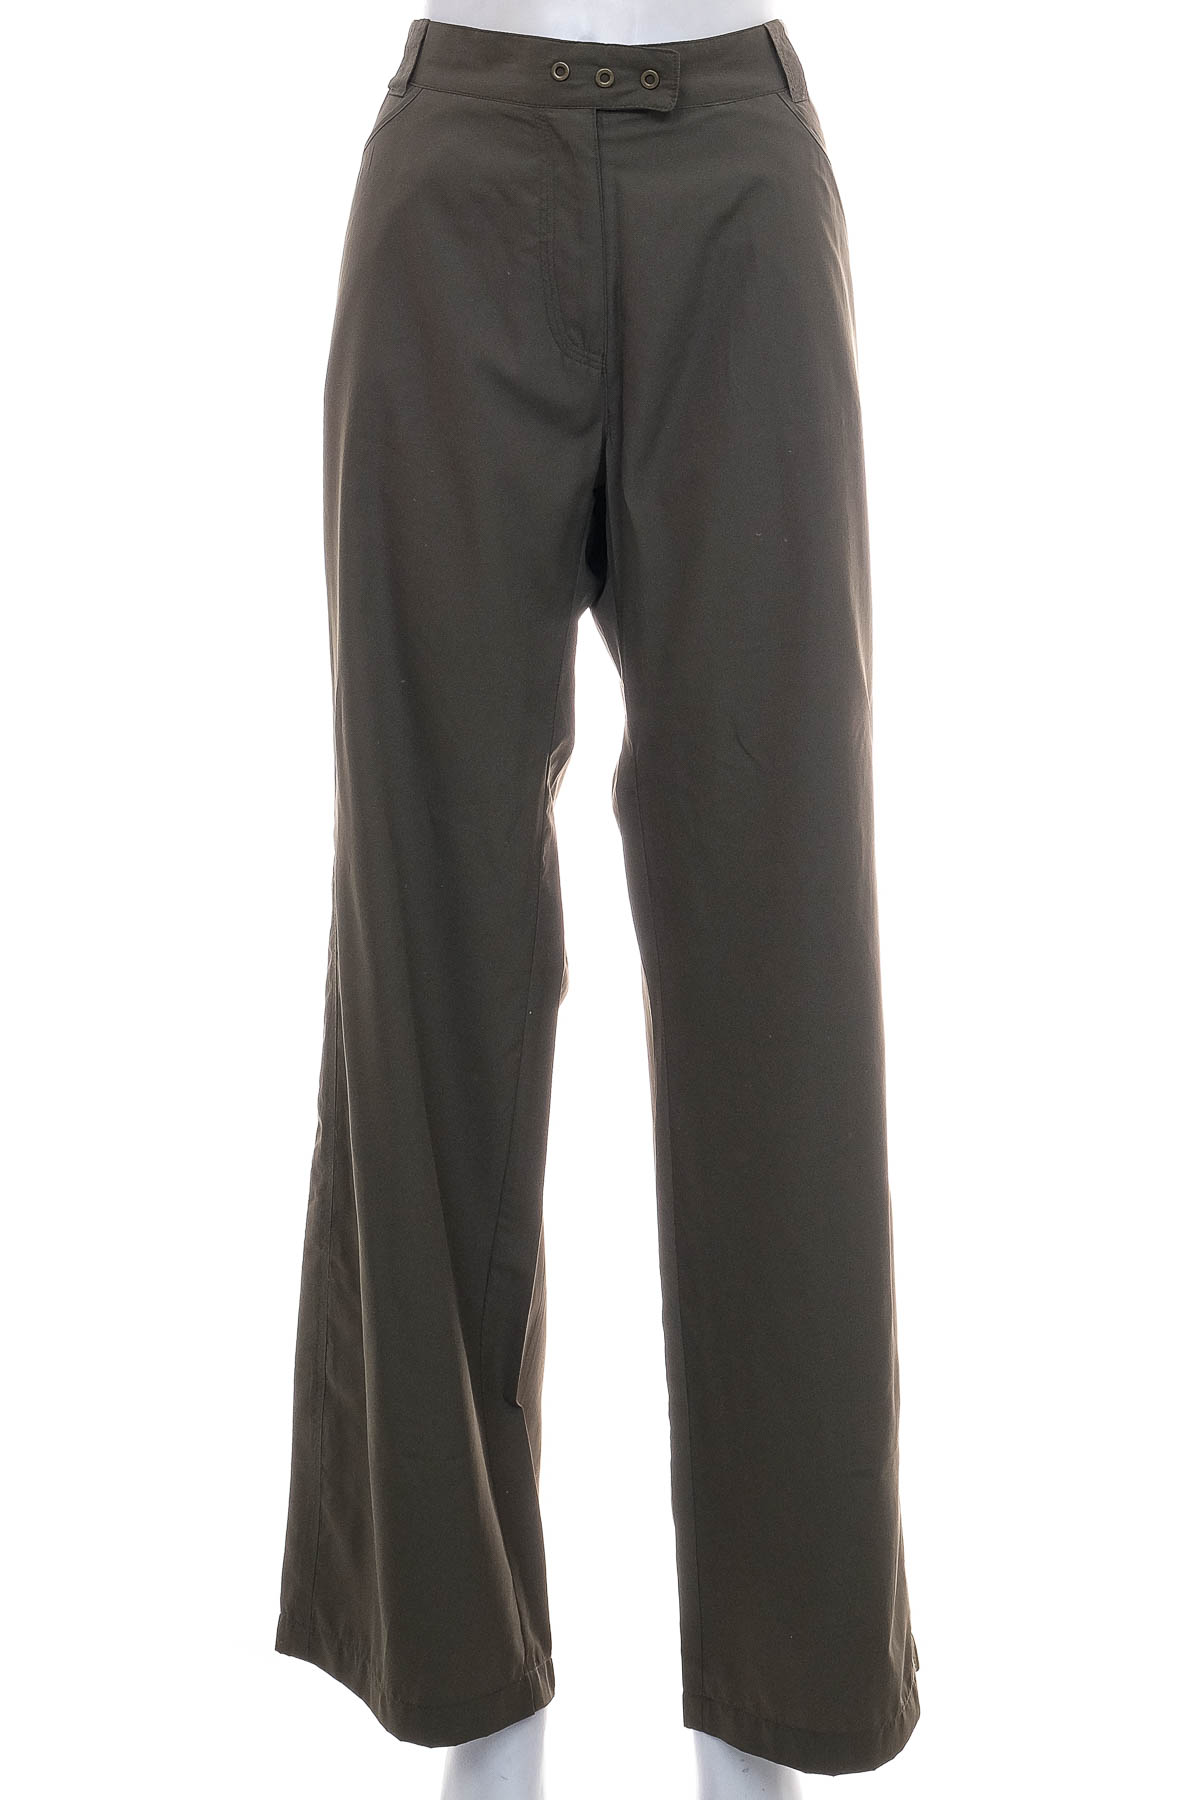 Women's trousers - Quick step - 0